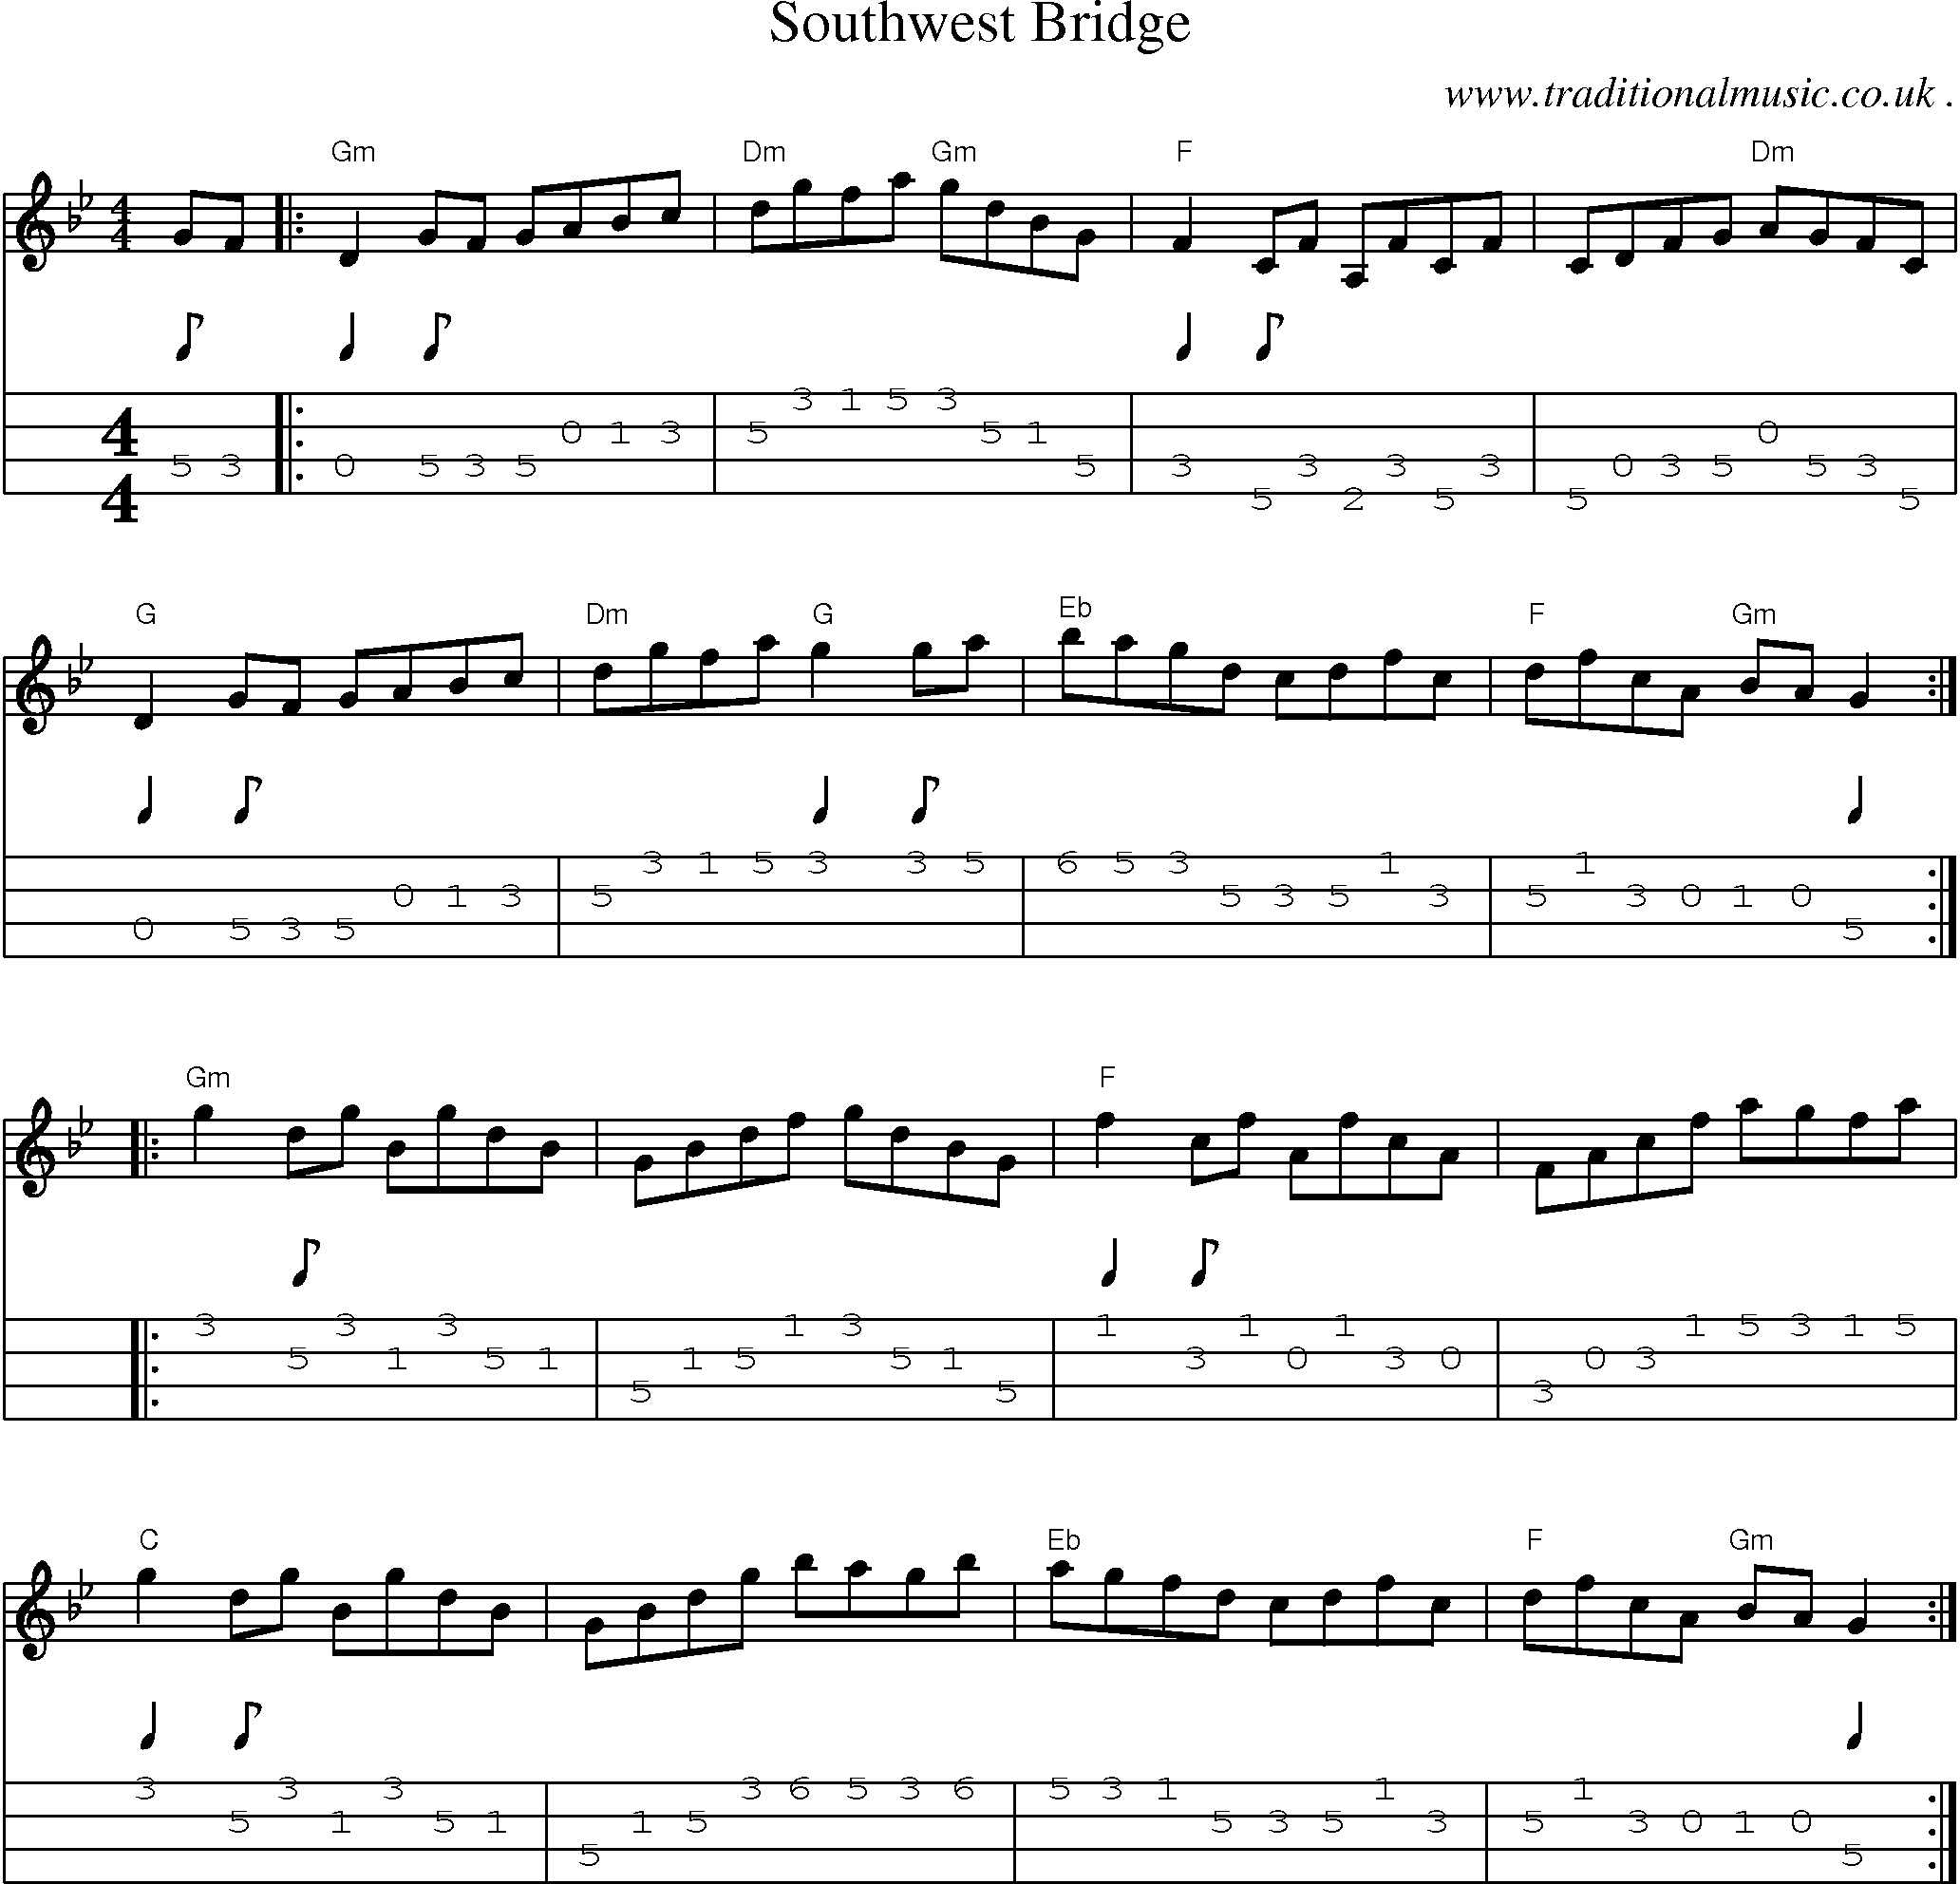 Music Score and Guitar Tabs for Southwest Bridge